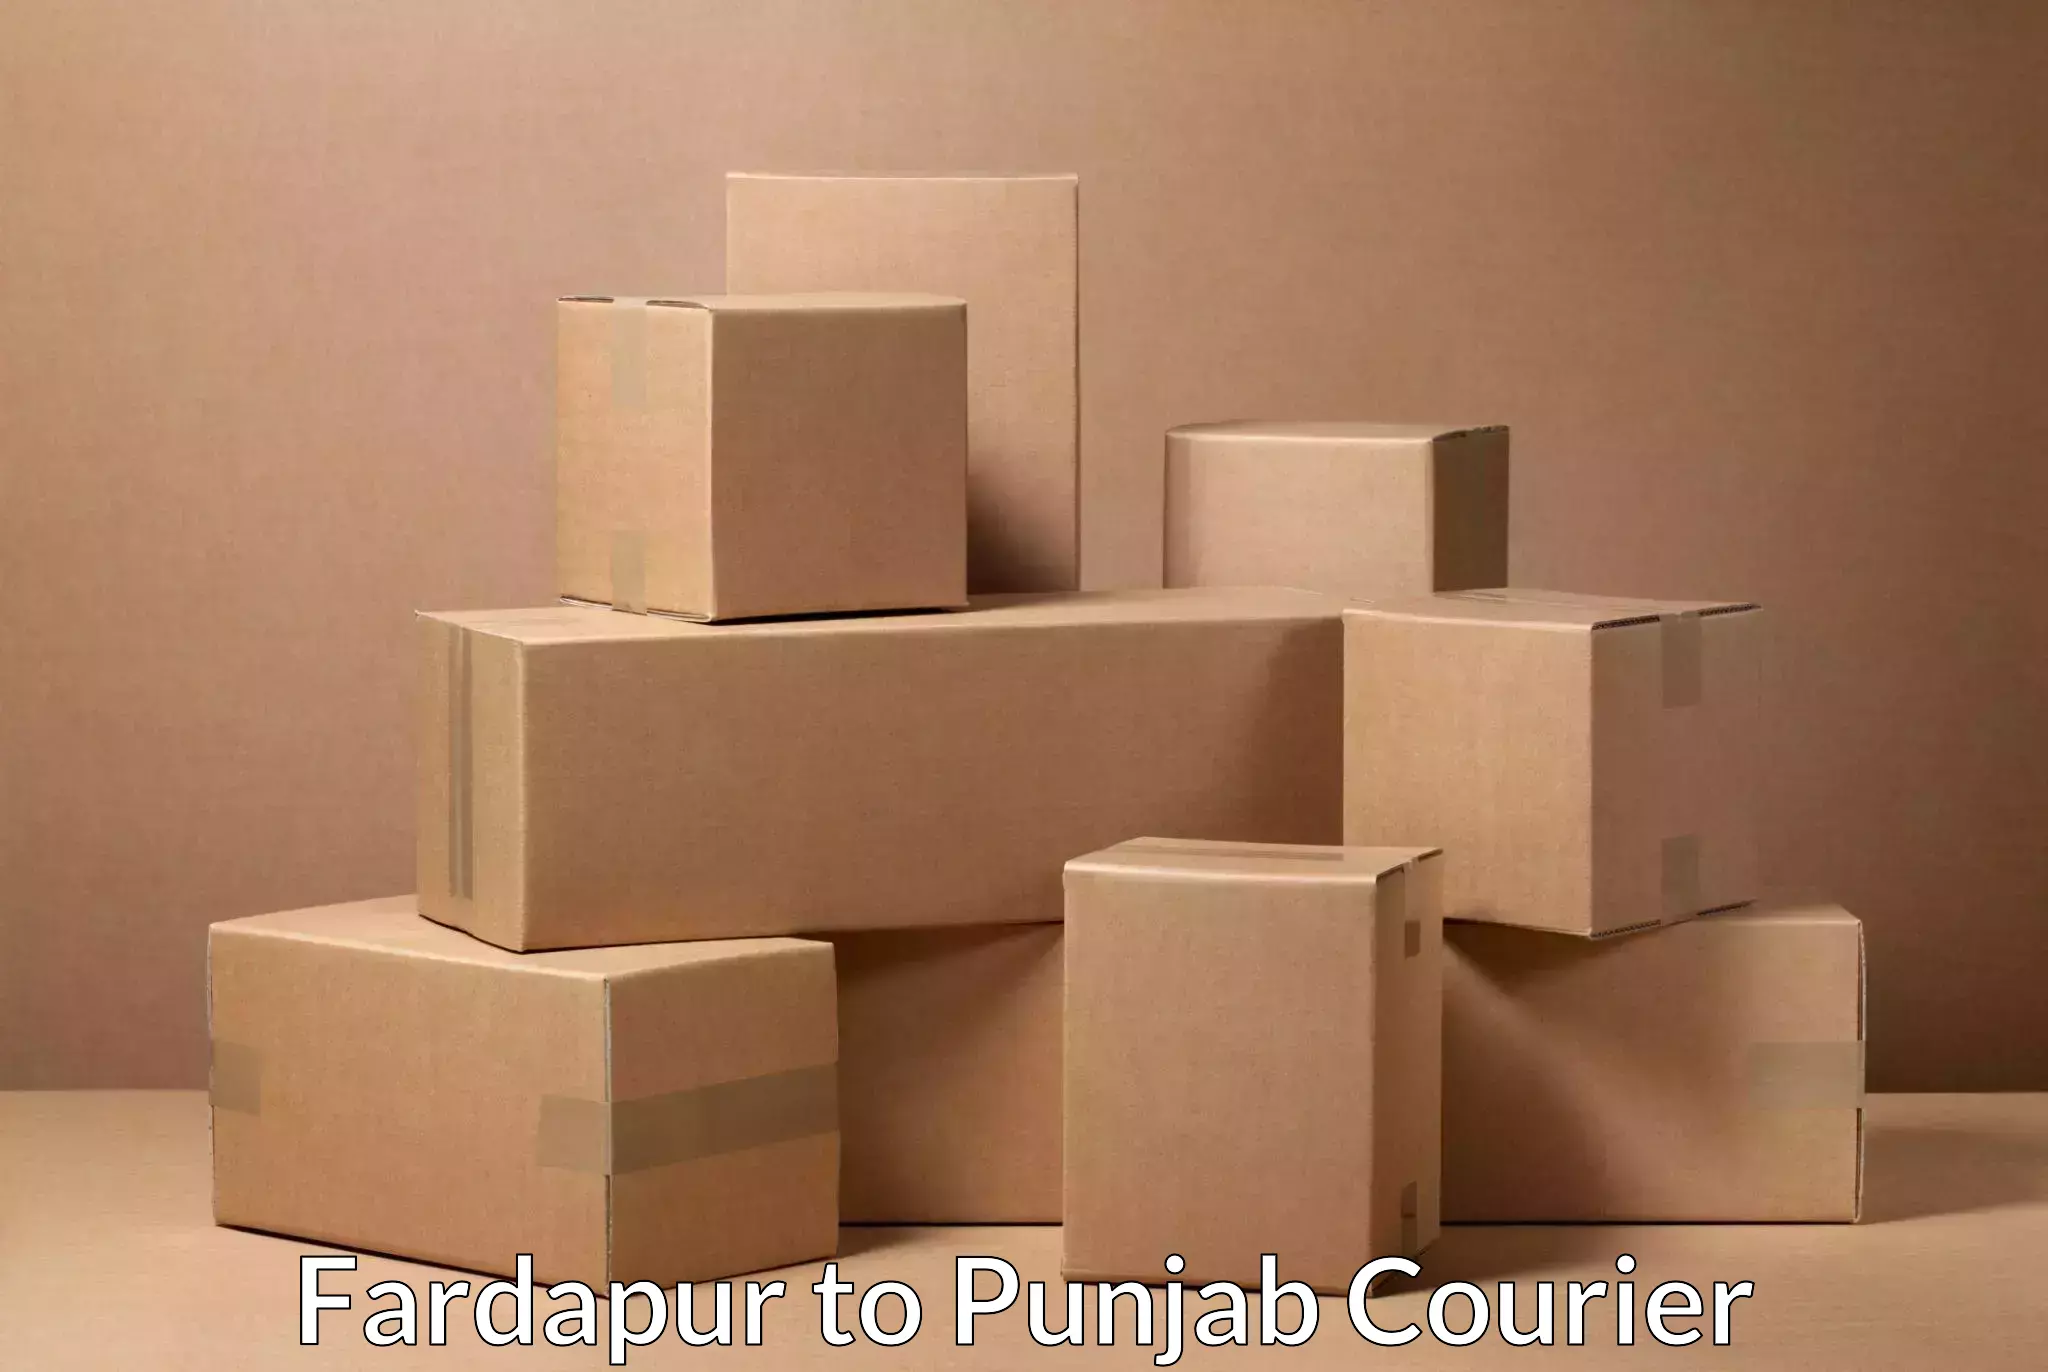 Multi-national courier services Fardapur to Punjab